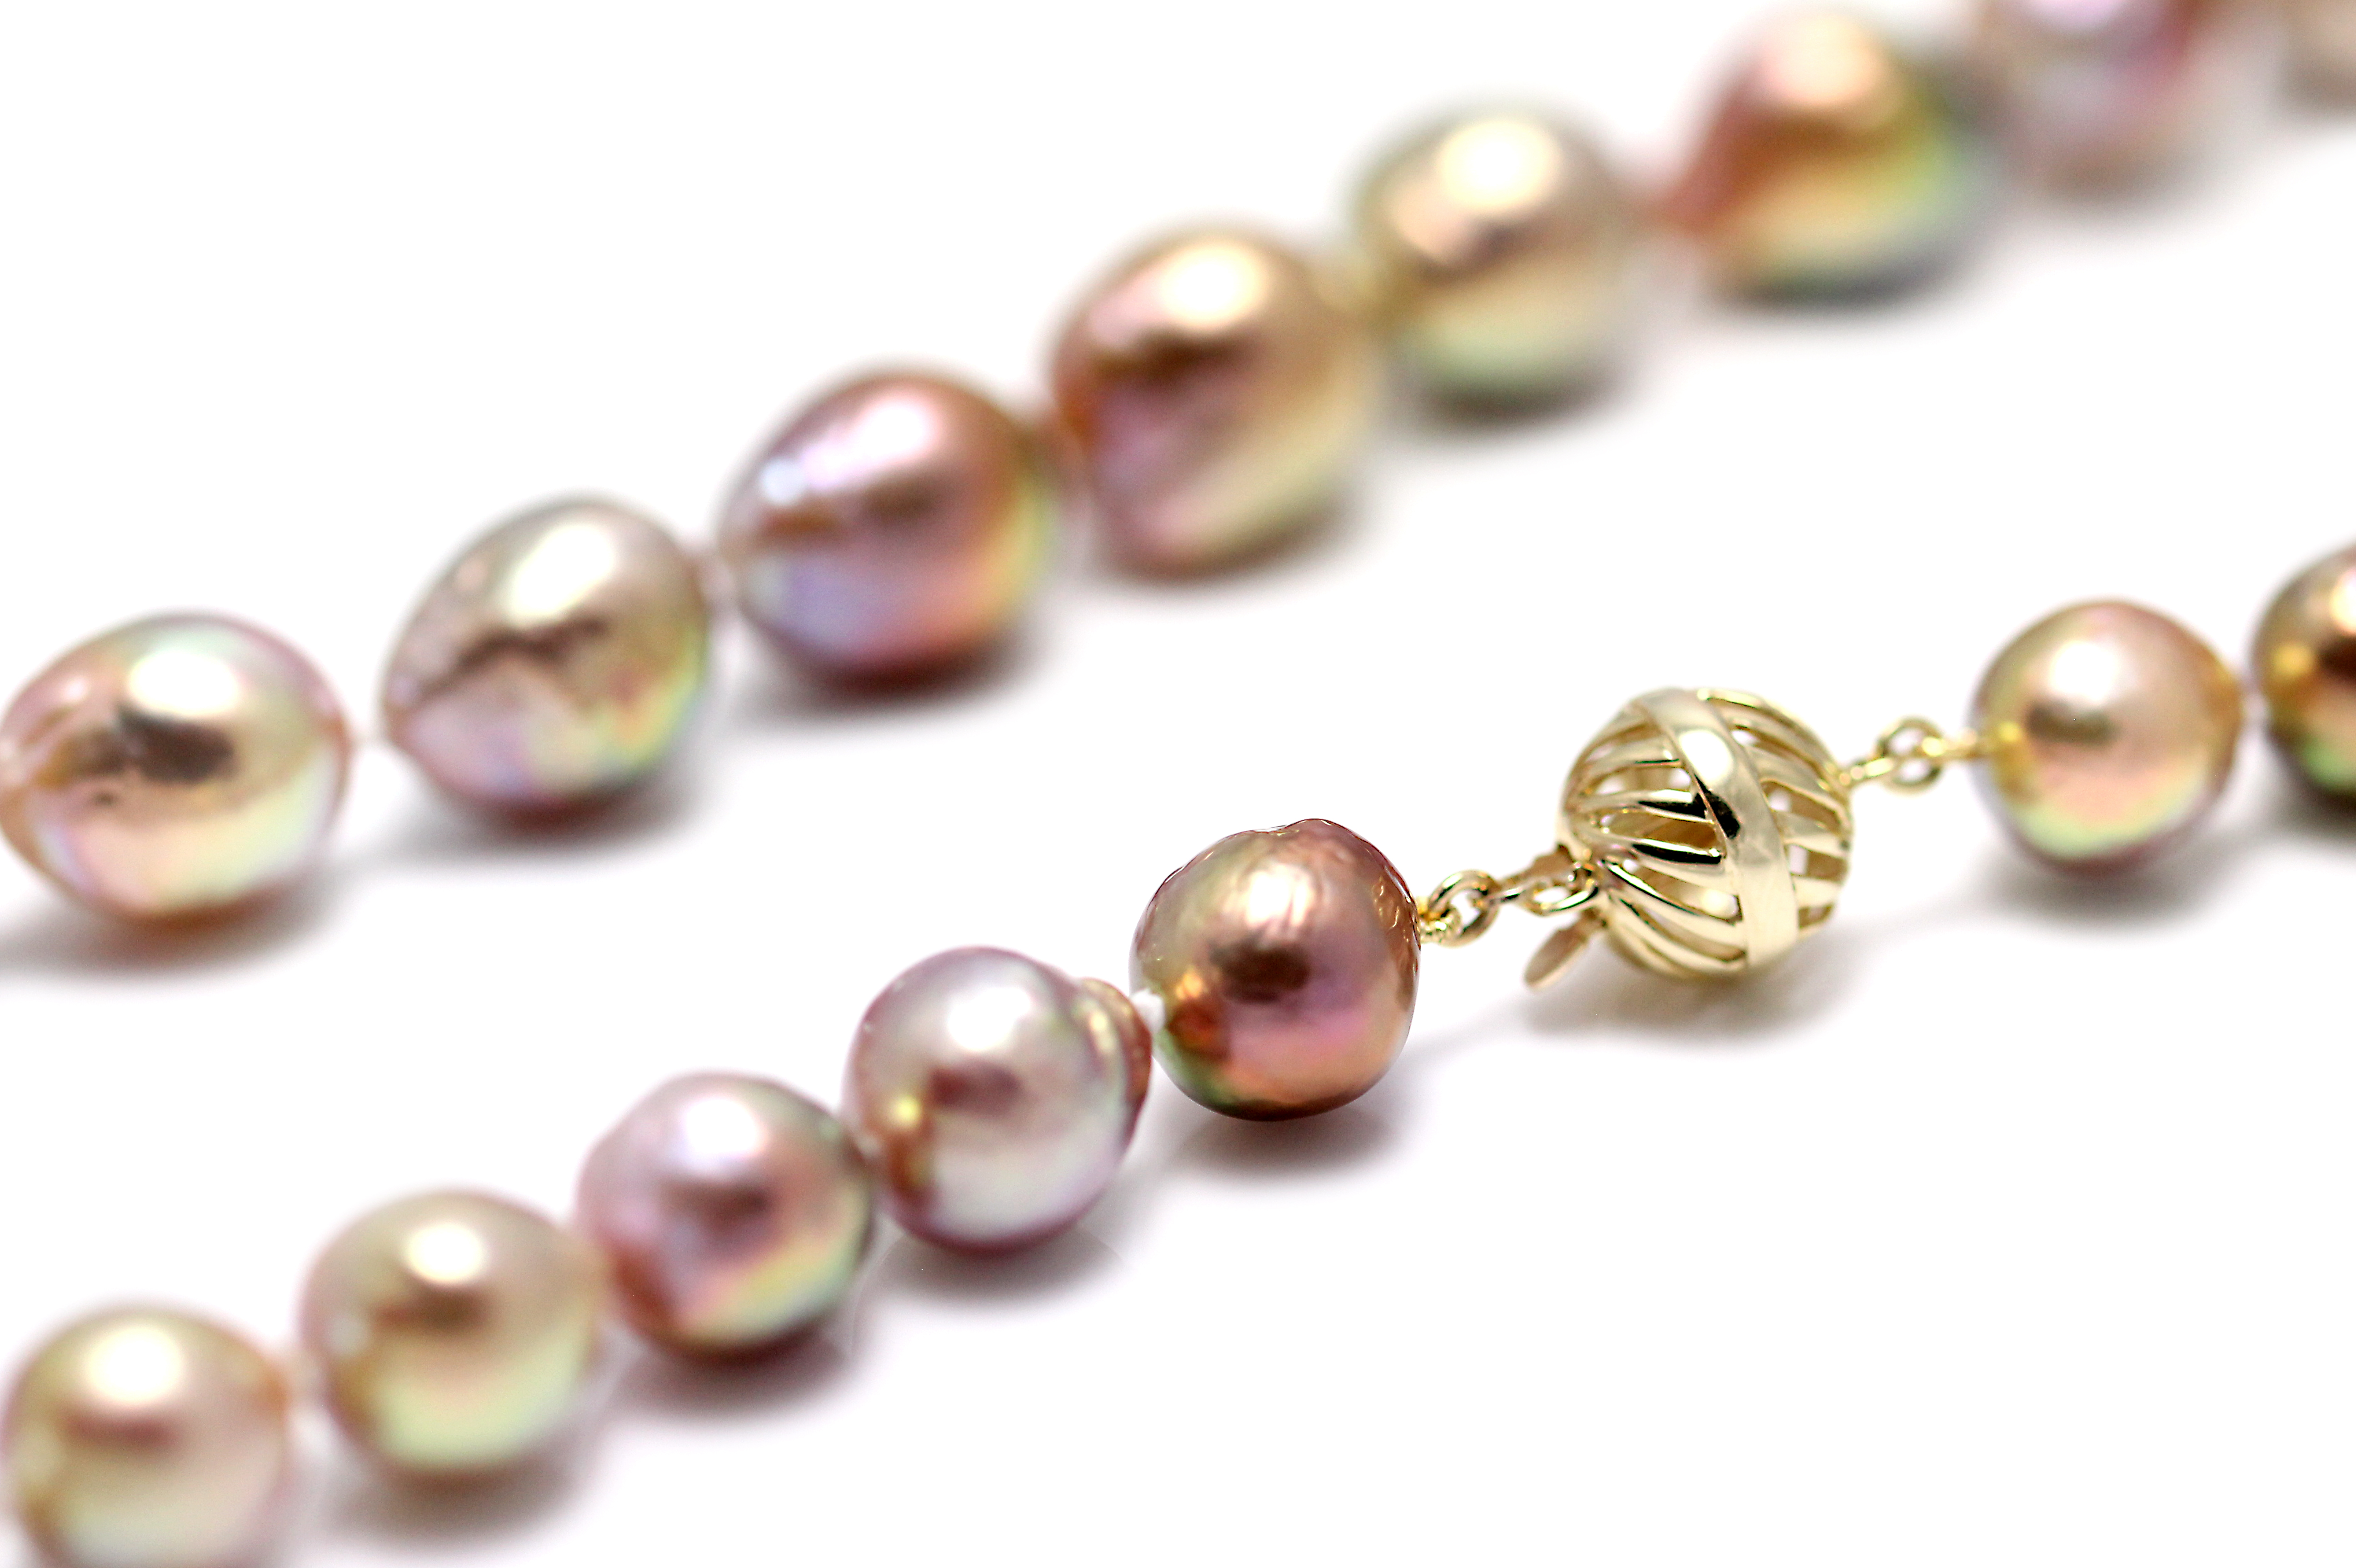 A jeweller’s guide to pearl care